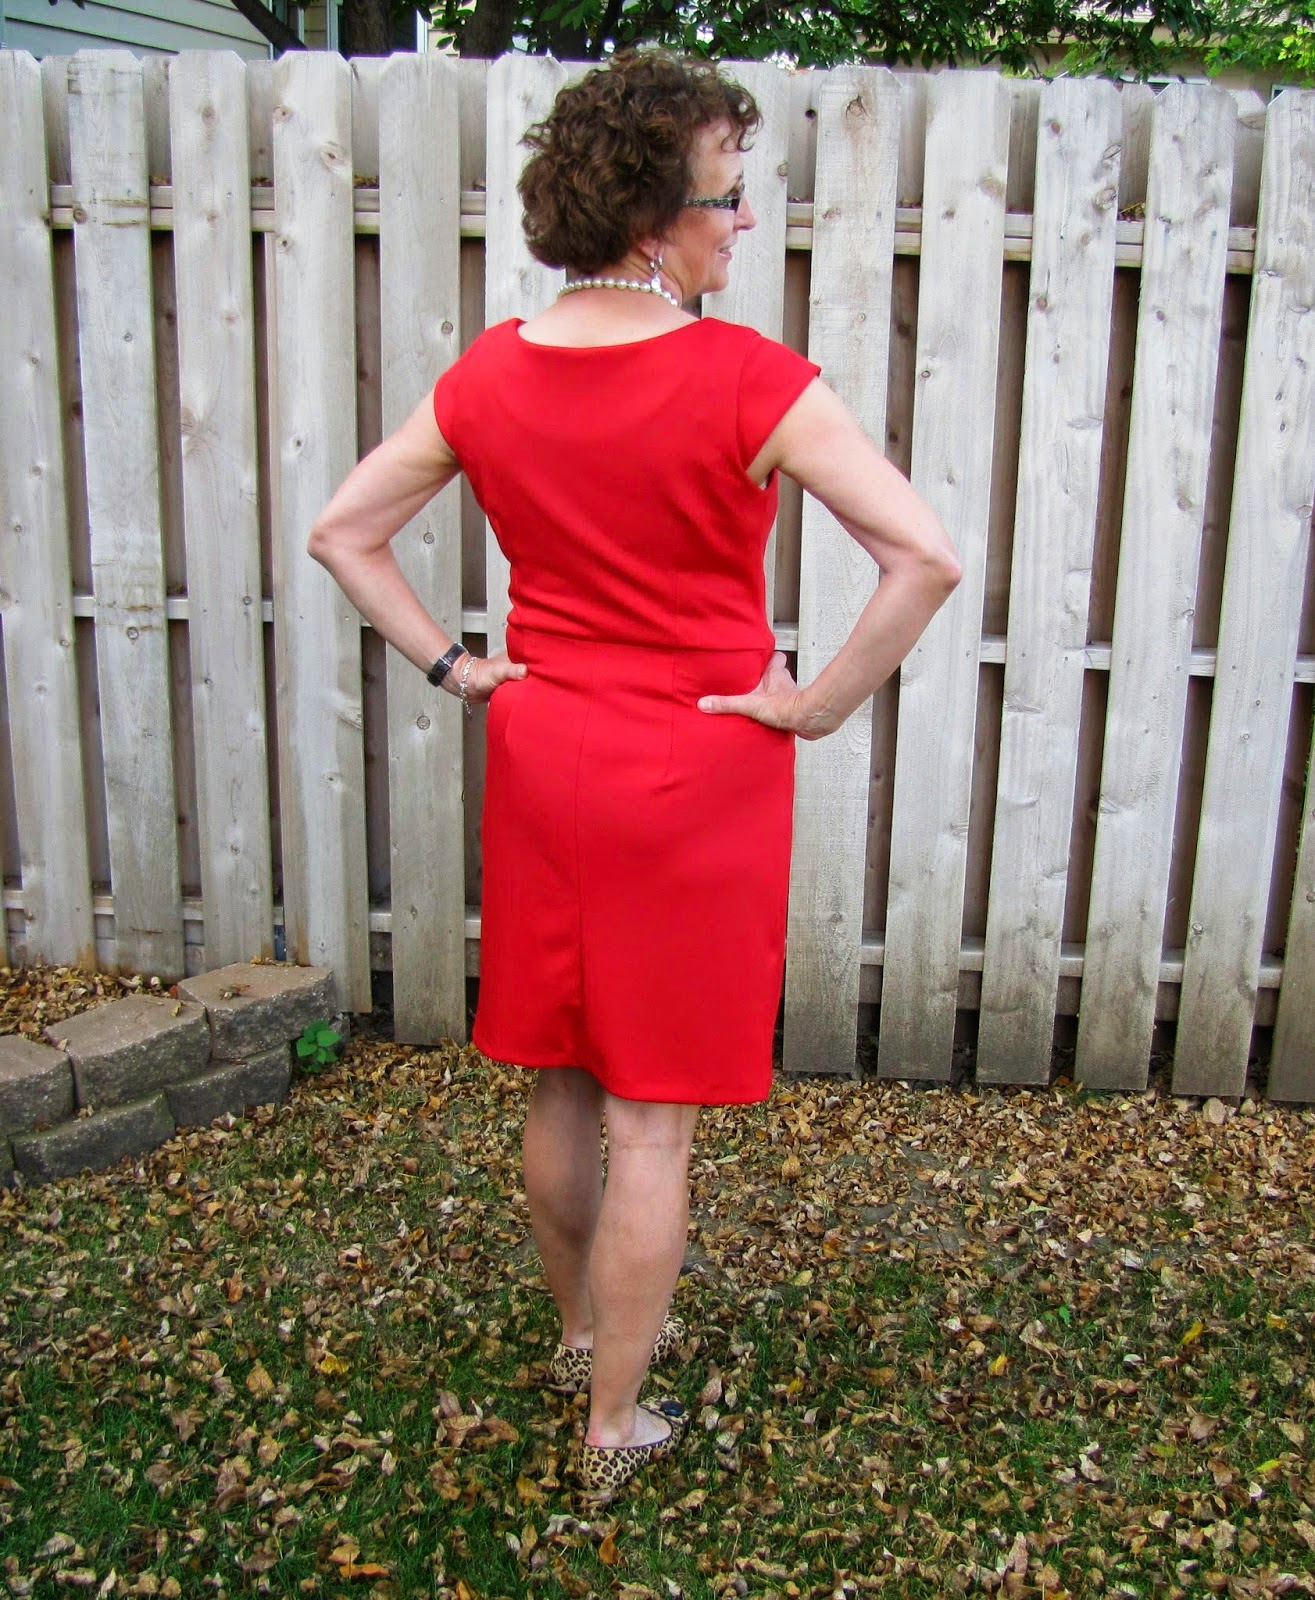 4th Challenge: Lady in Red Challenge - What They Made!